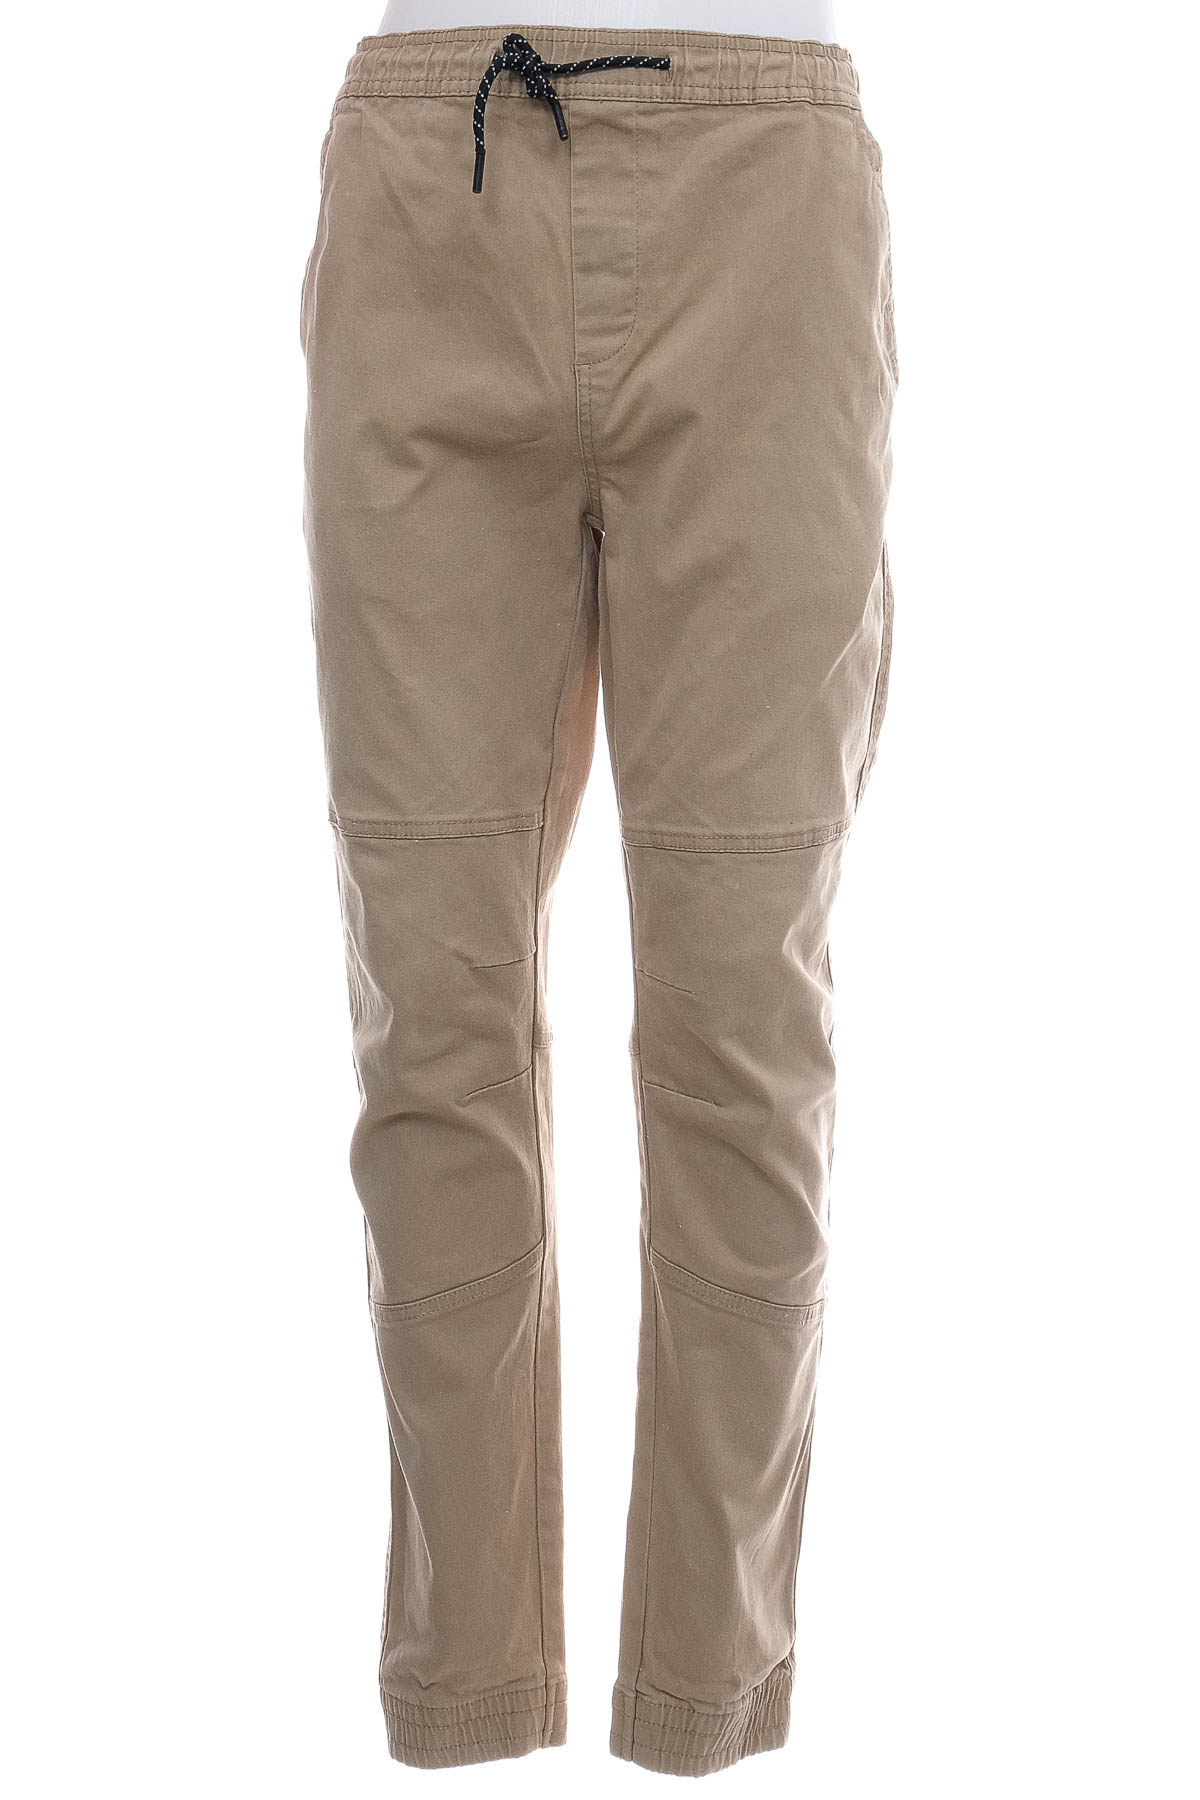 Men's trousers - ! Solid - 0